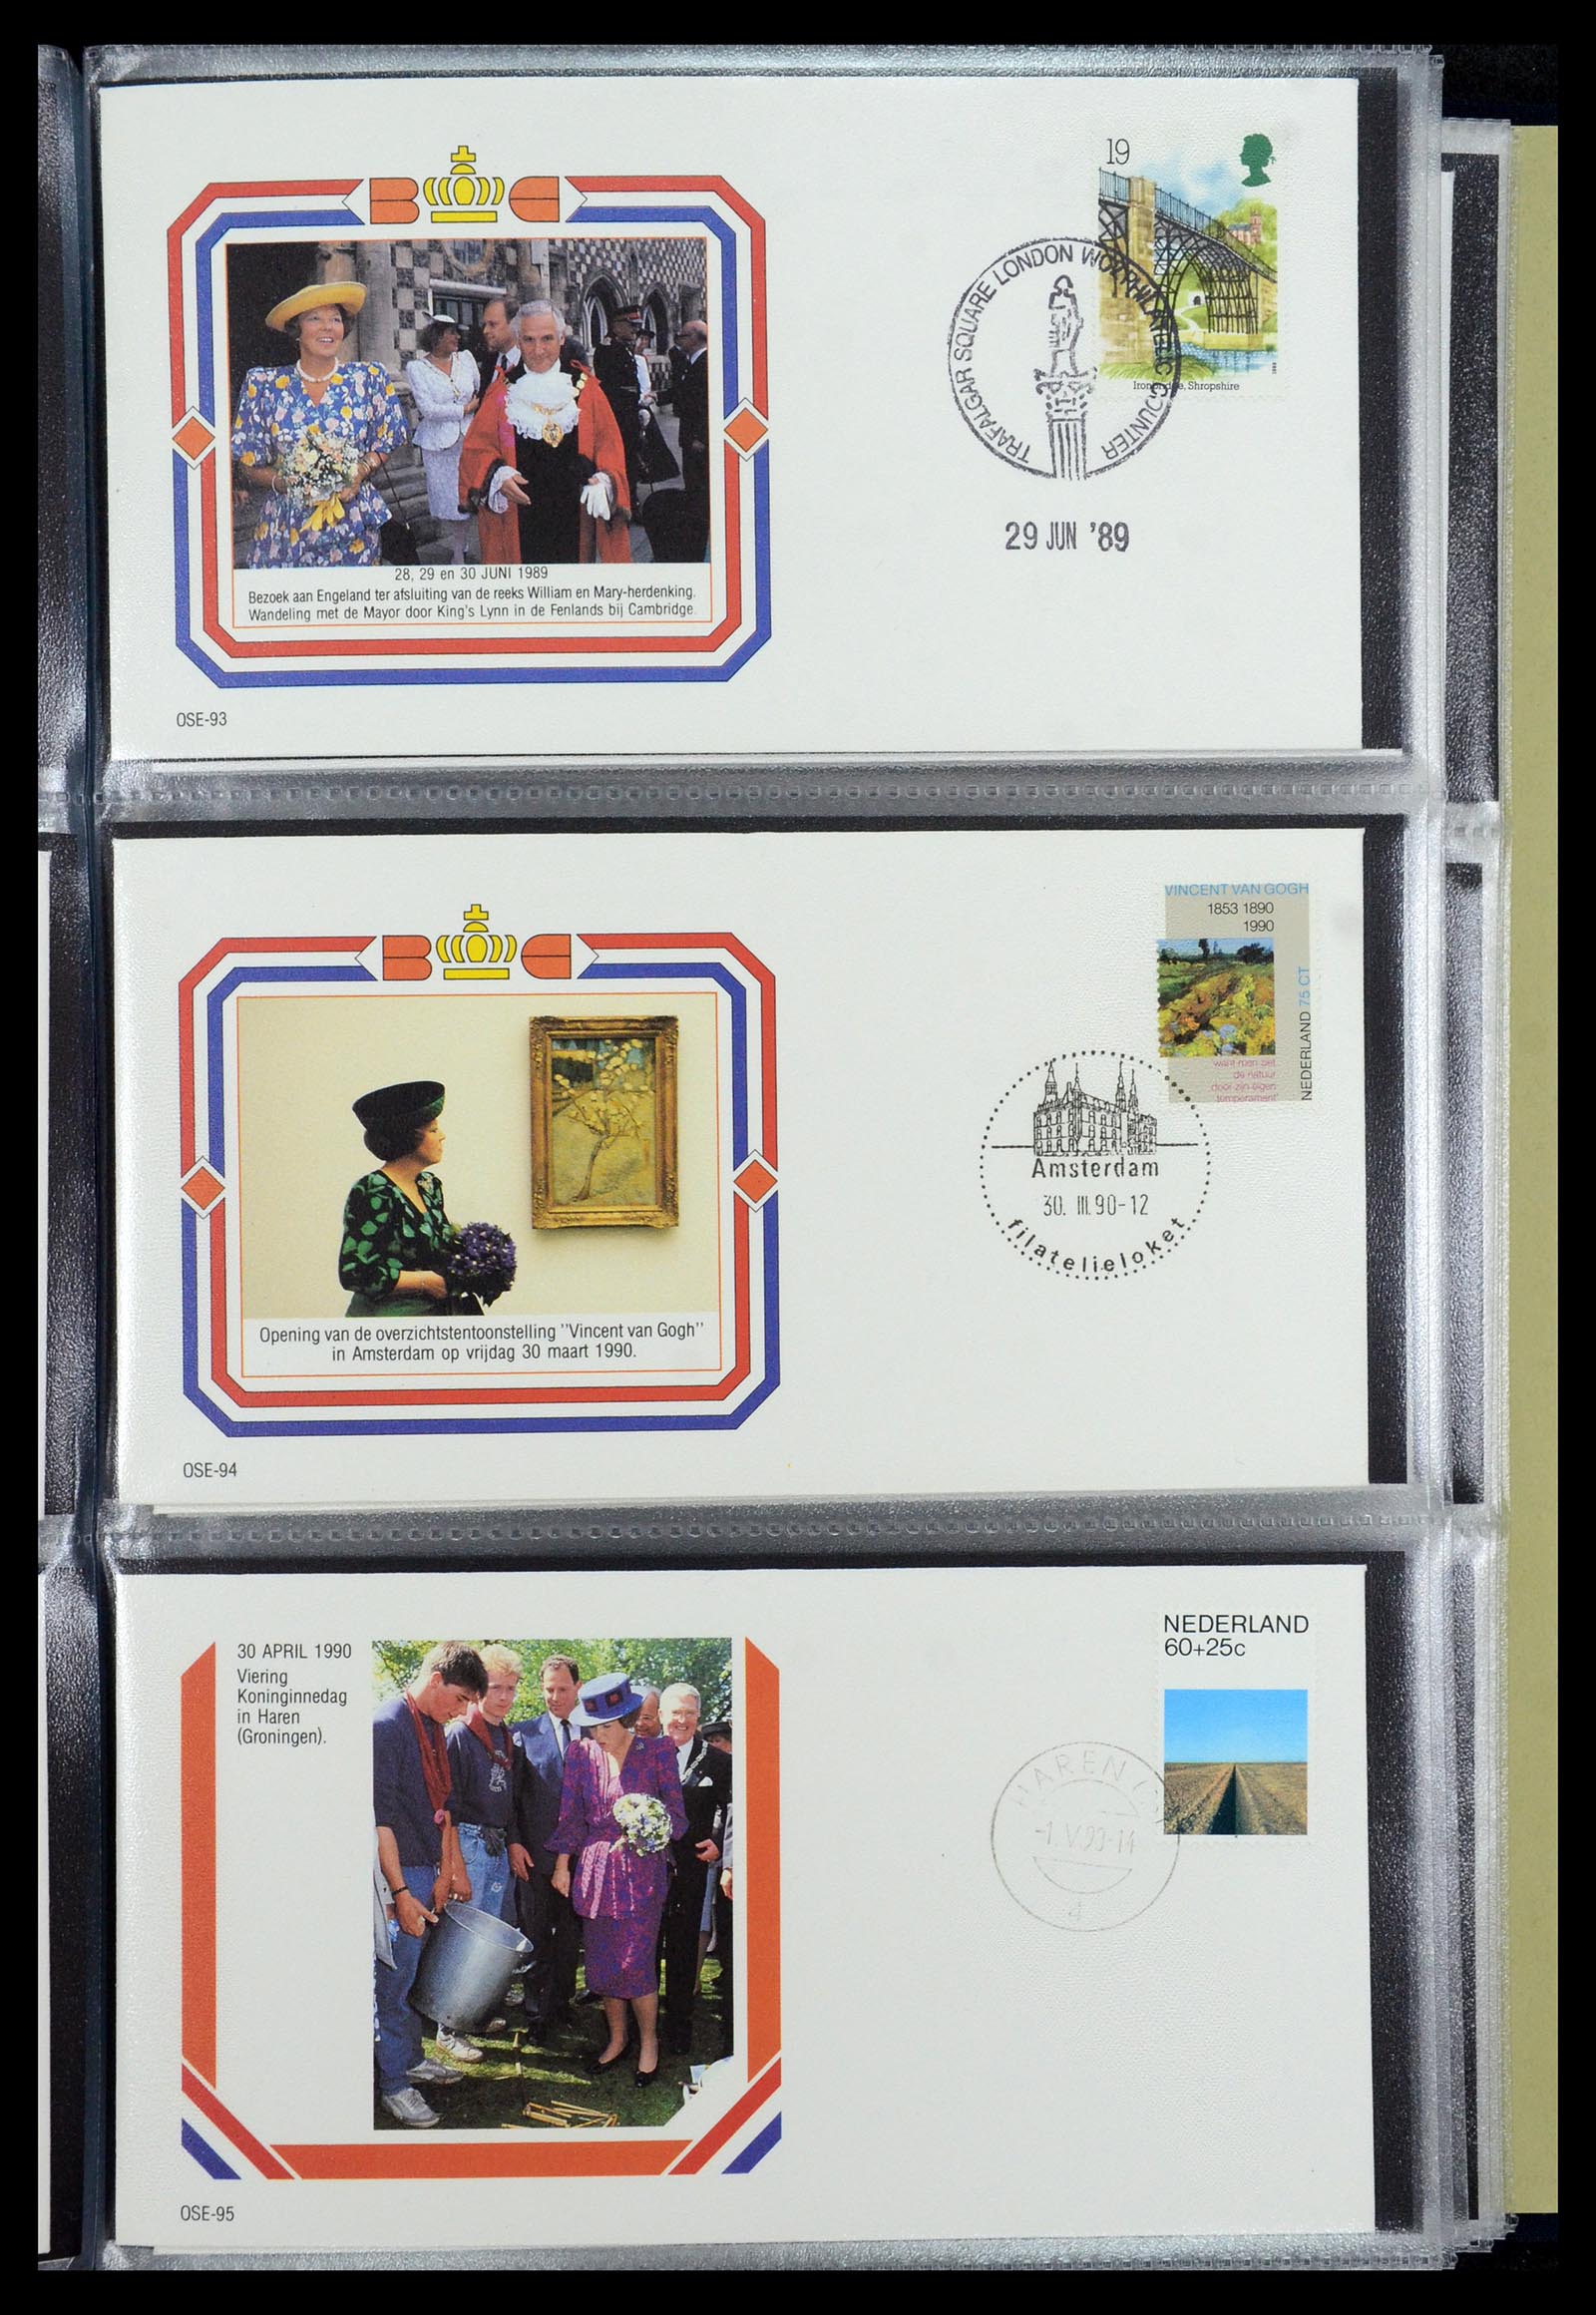 36322 034 - Stamp collection 36322 Netherlands Dutch Royal Family 1981-2013.